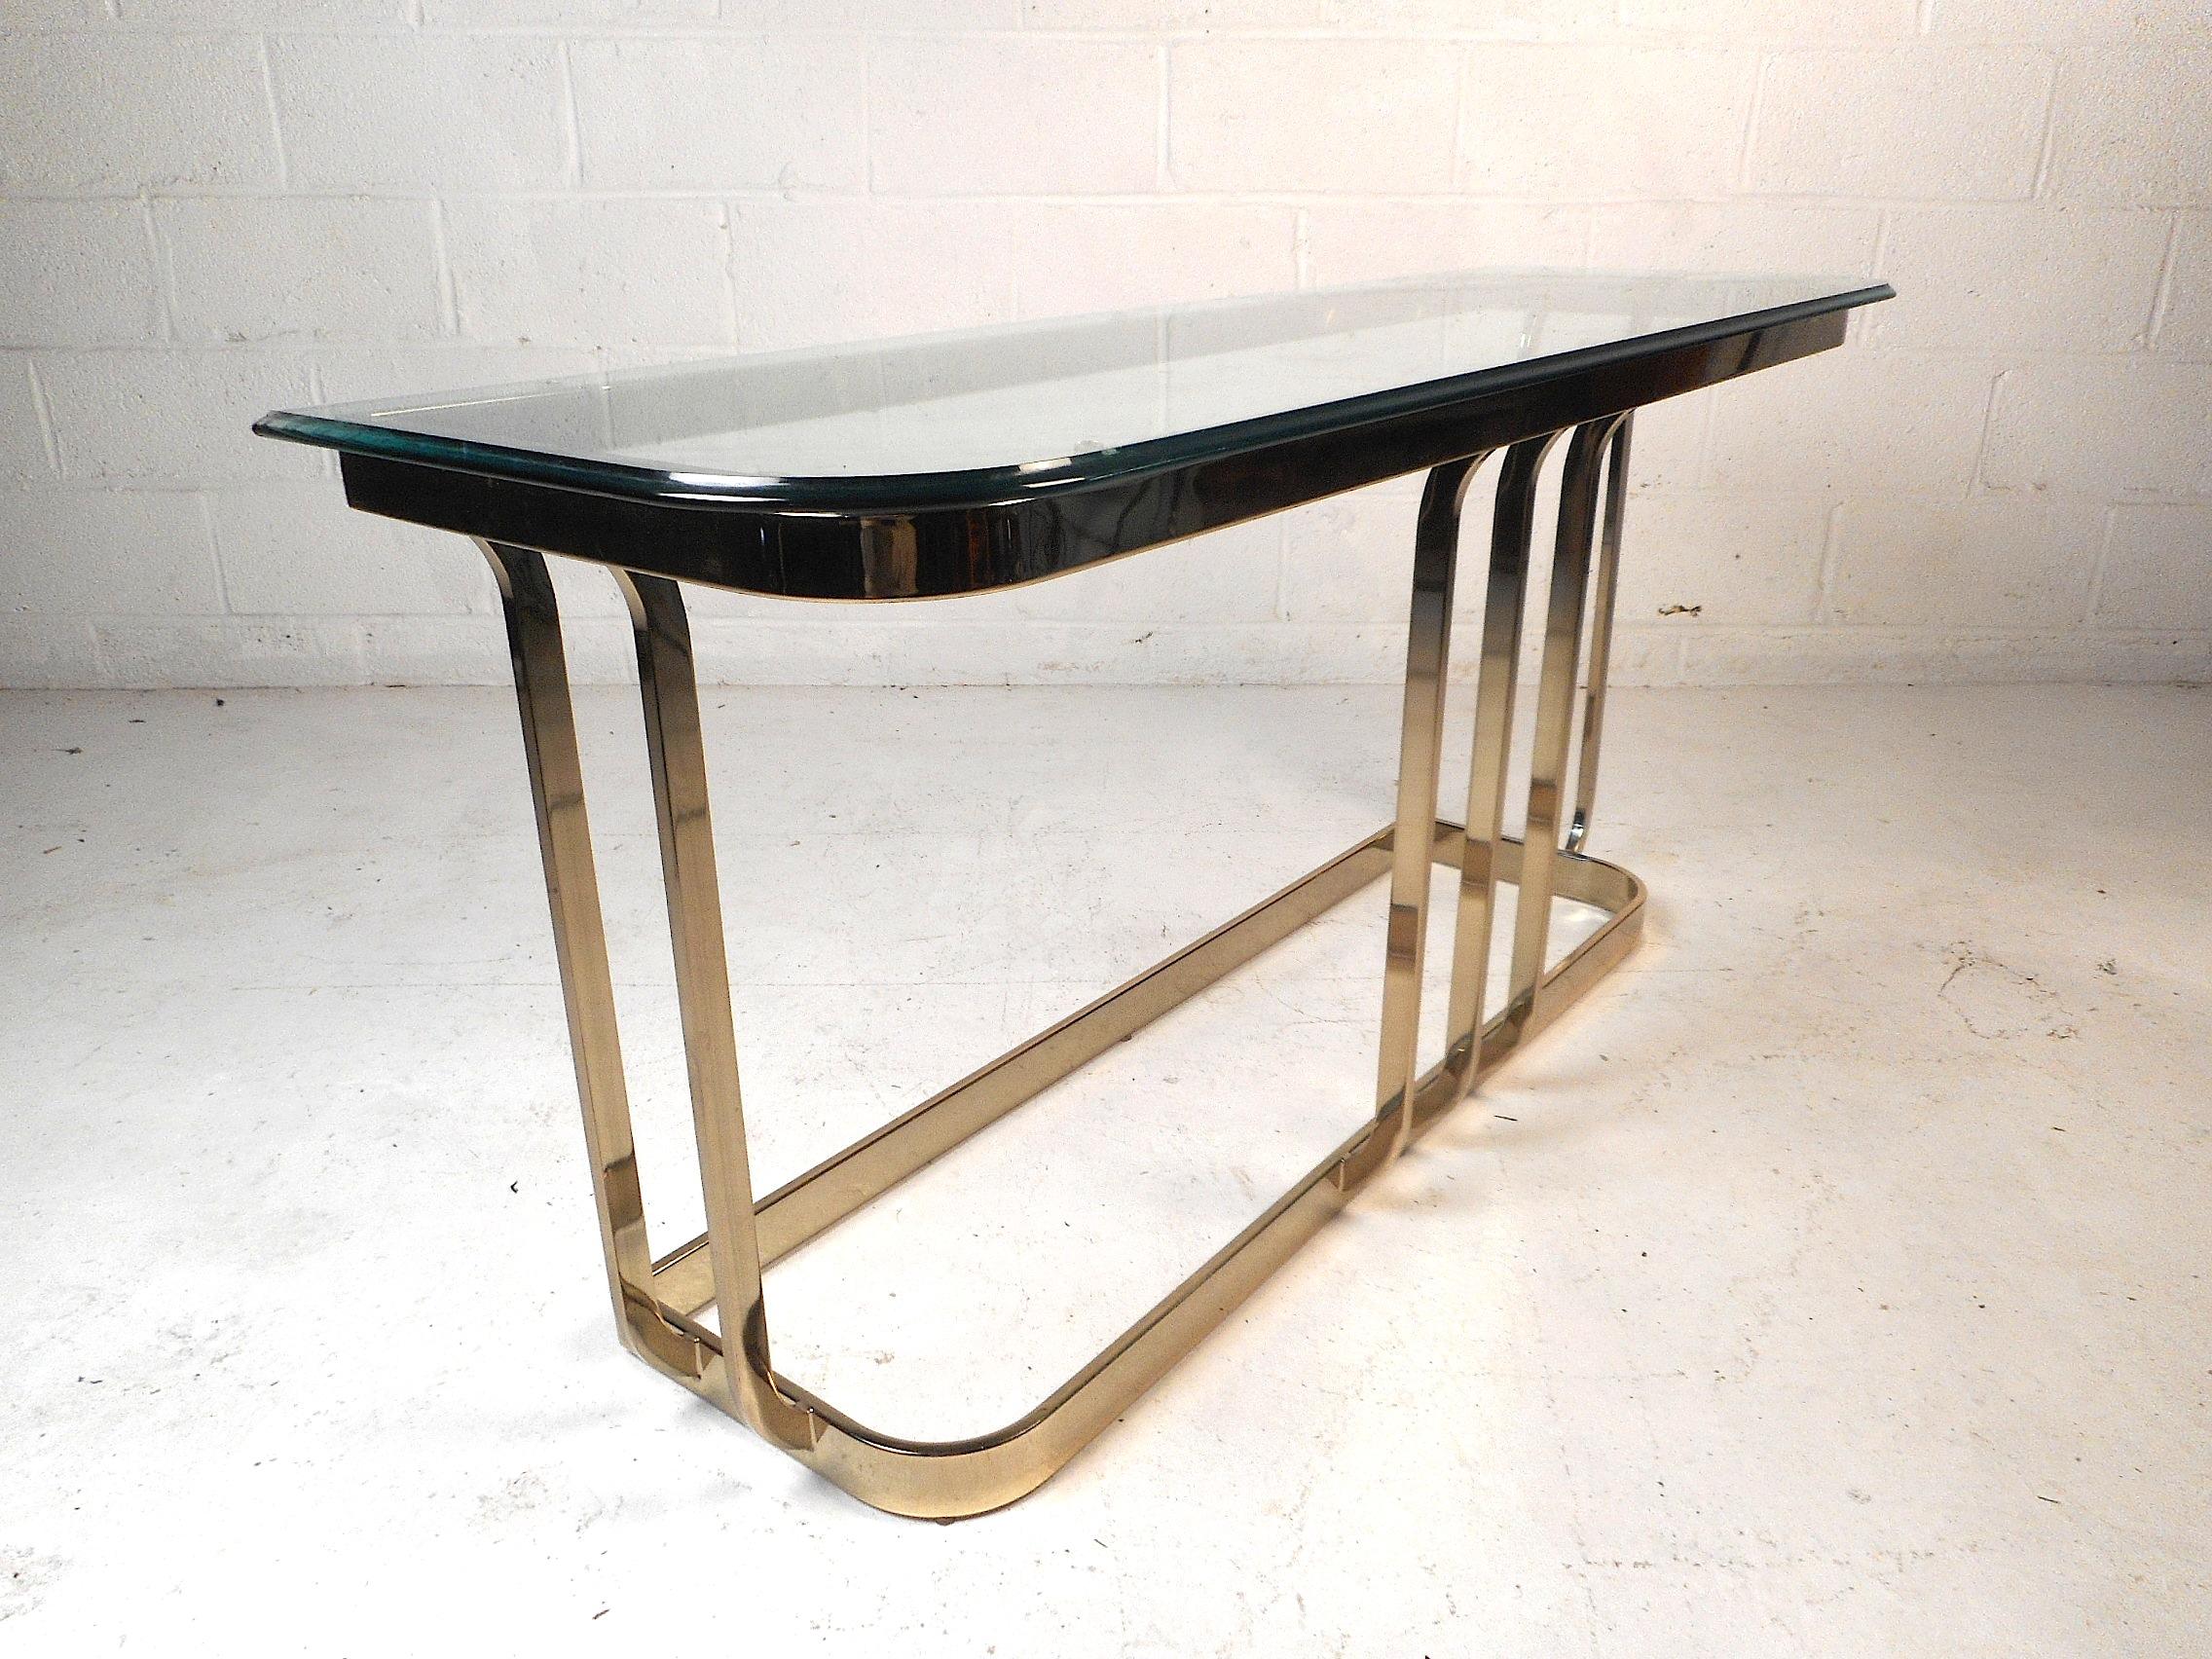 This impressive midcentury console table features a pane of half-inch thick beveled glass, and a brass-plated base with elegantly tapered supports. This table would make a great addition to any home, office, or business. Please confirm item location